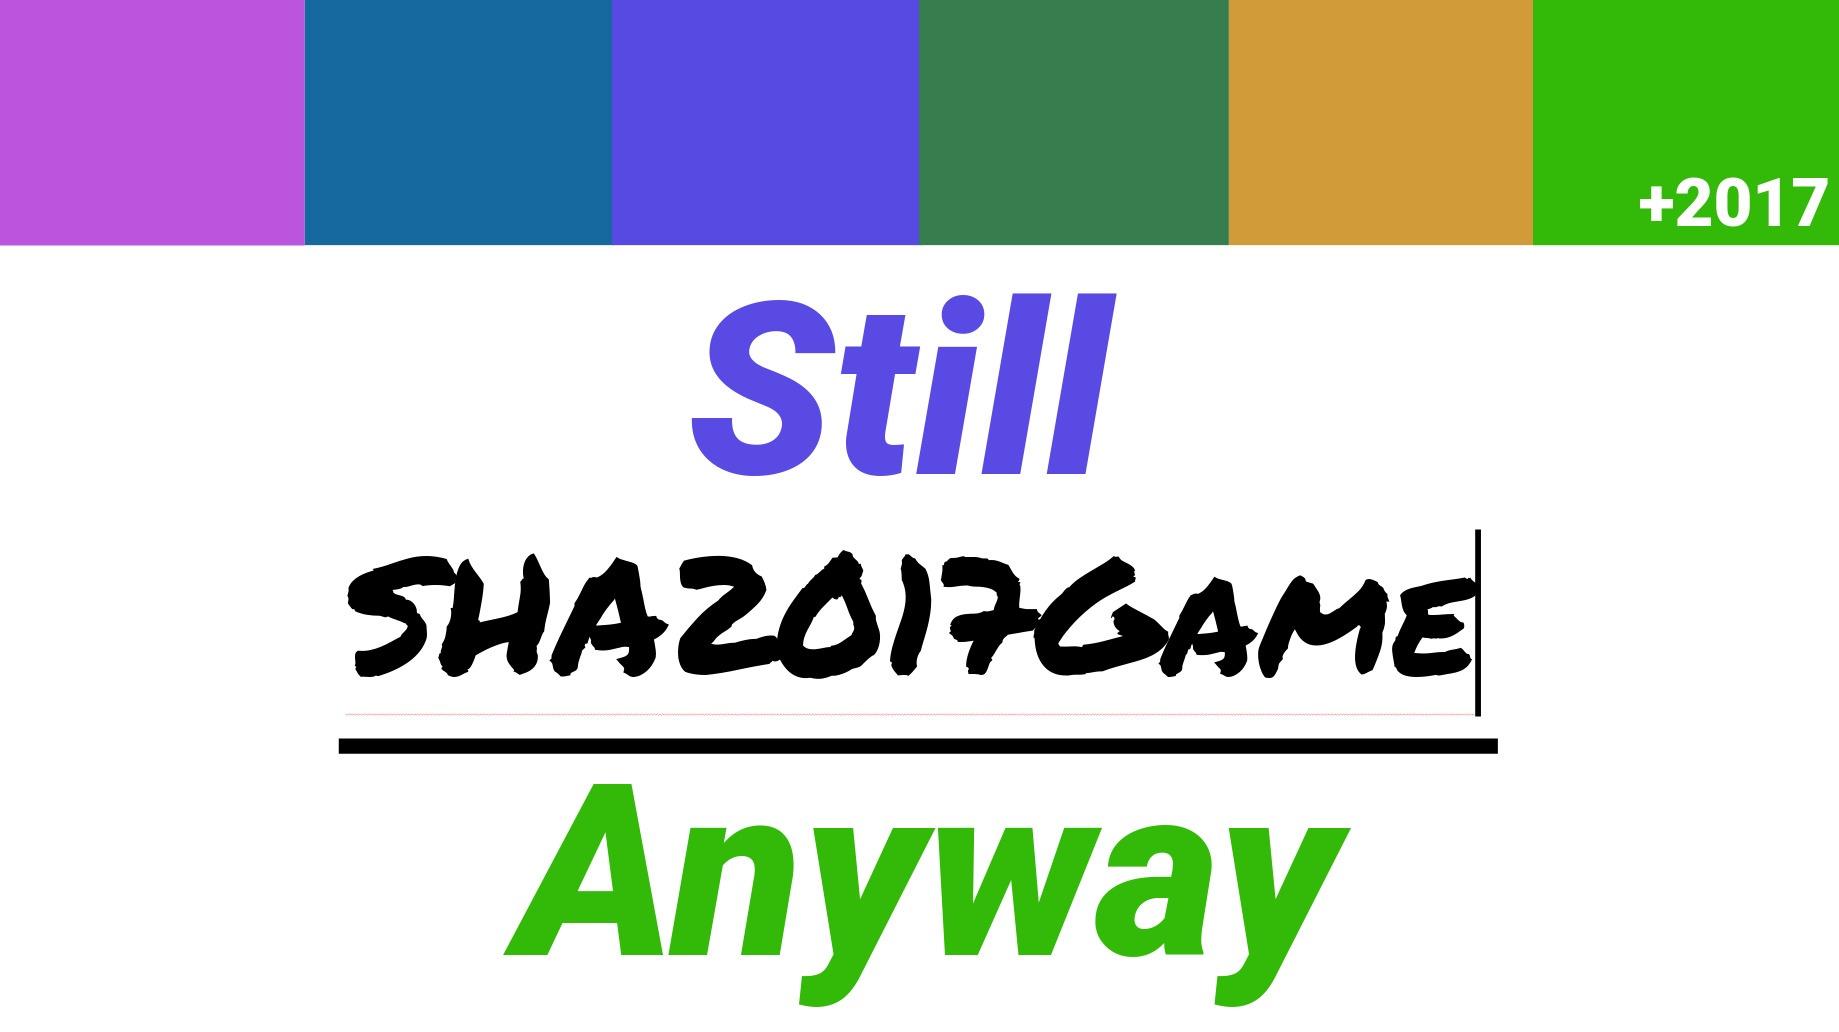 File:SHA2017Game_Picture.jpg